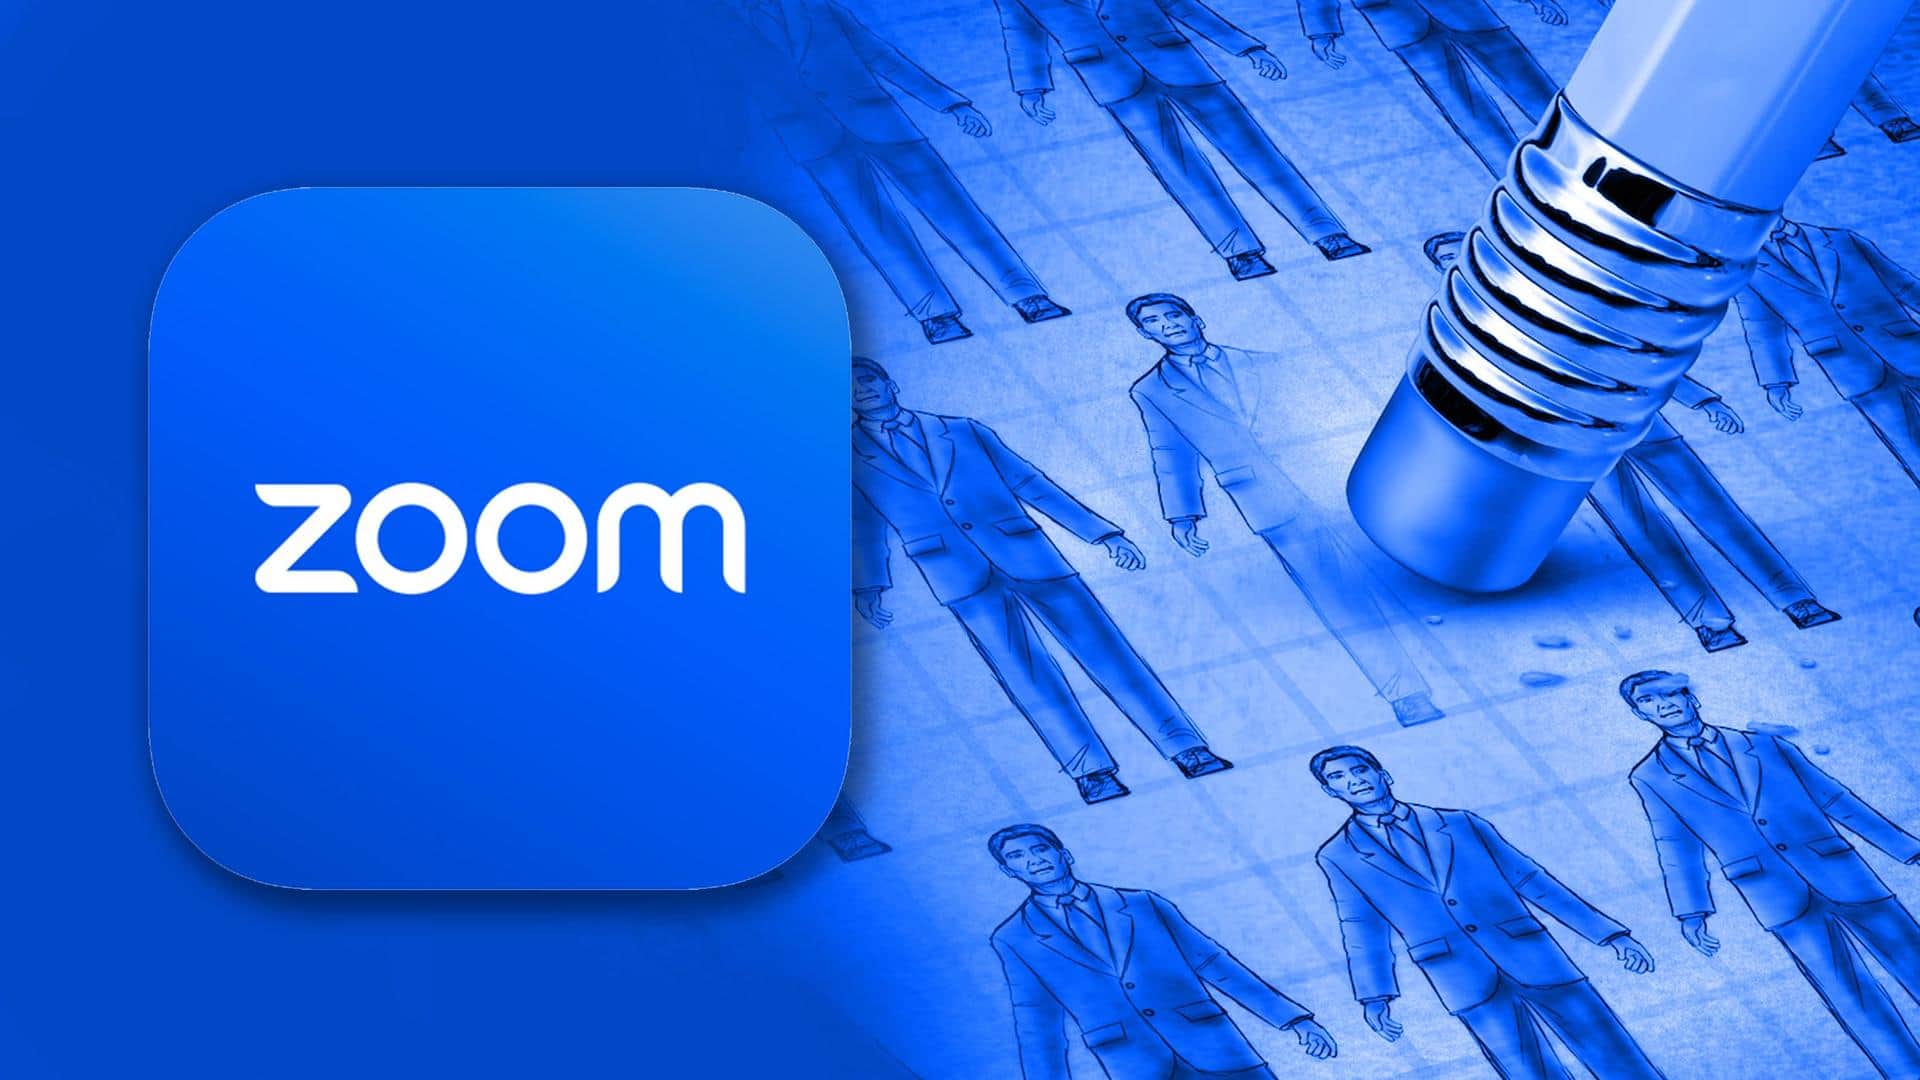 Zoom fires 1,300 employees due to "uncertainty of global economy"